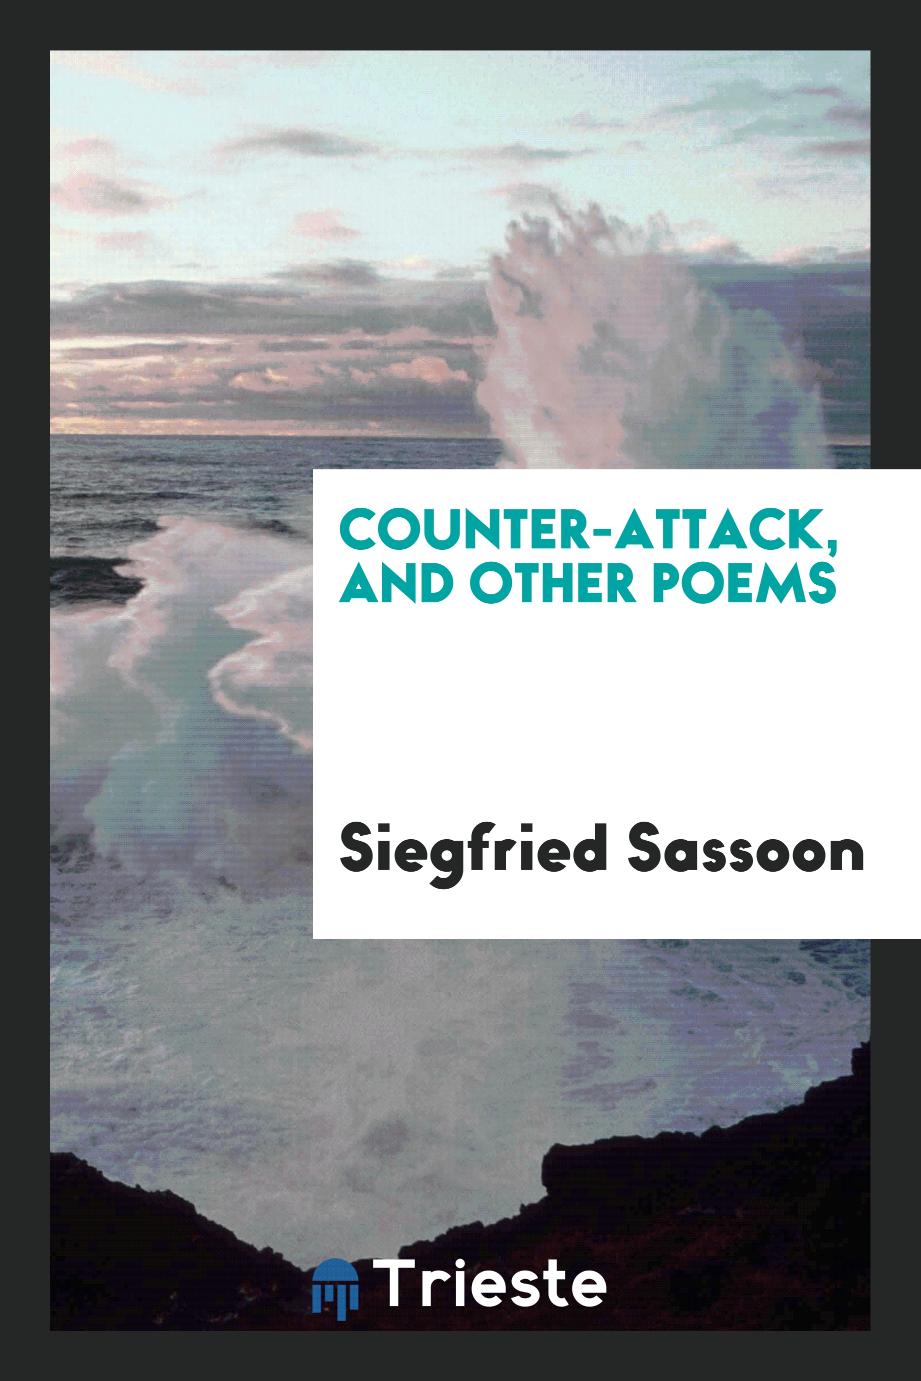 Counter-attack, and Other Poems